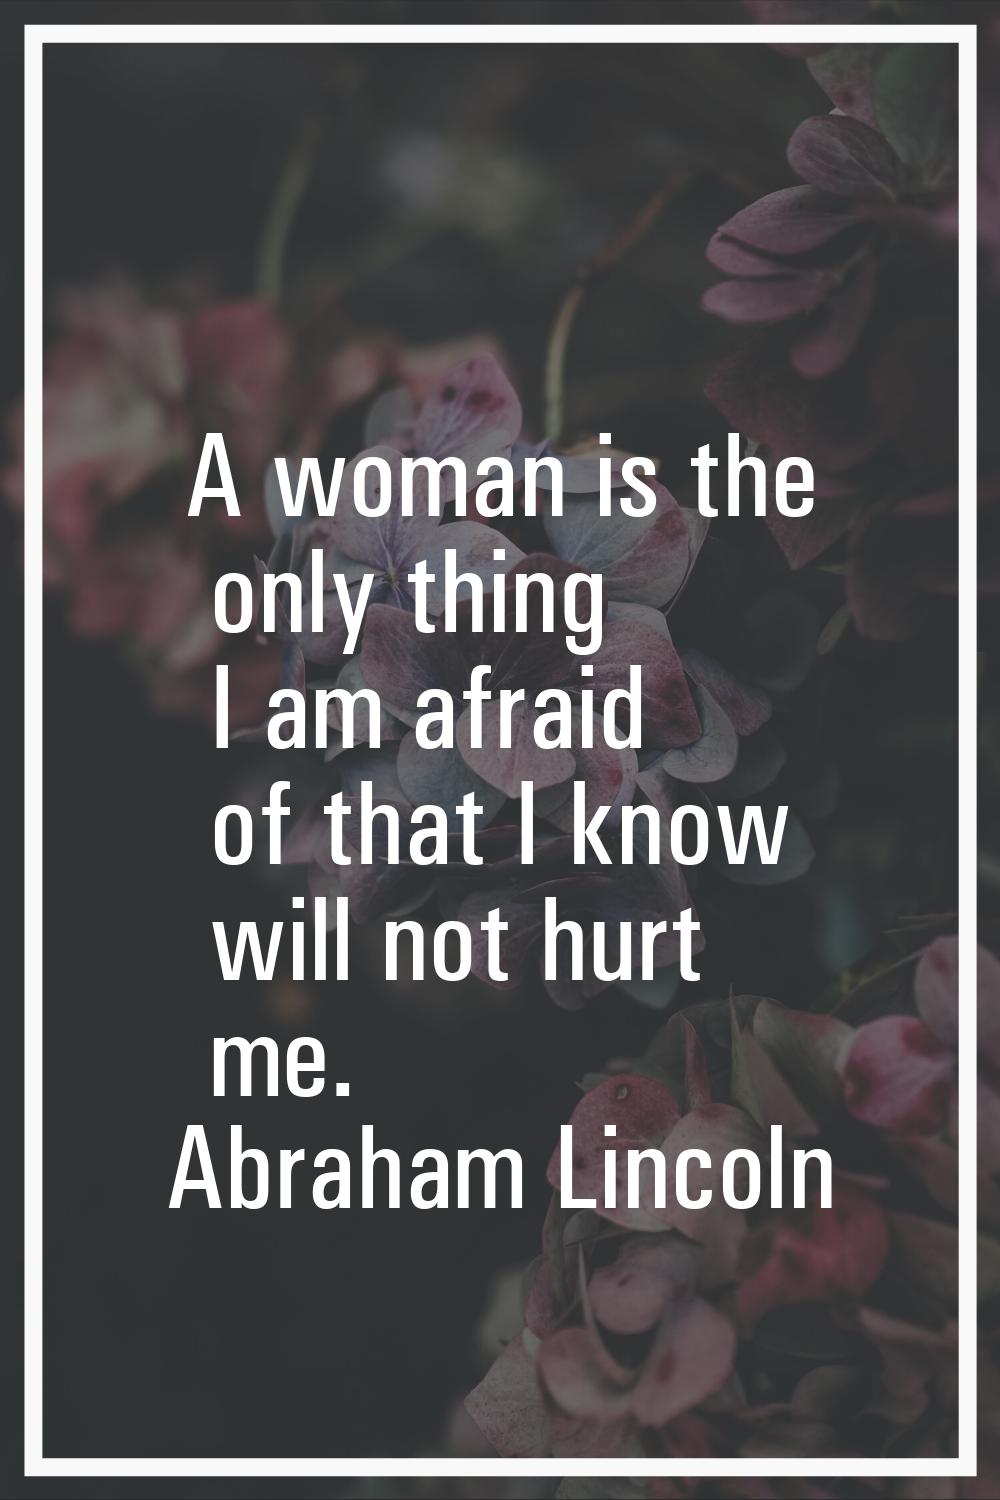 A woman is the only thing I am afraid of that I know will not hurt me.